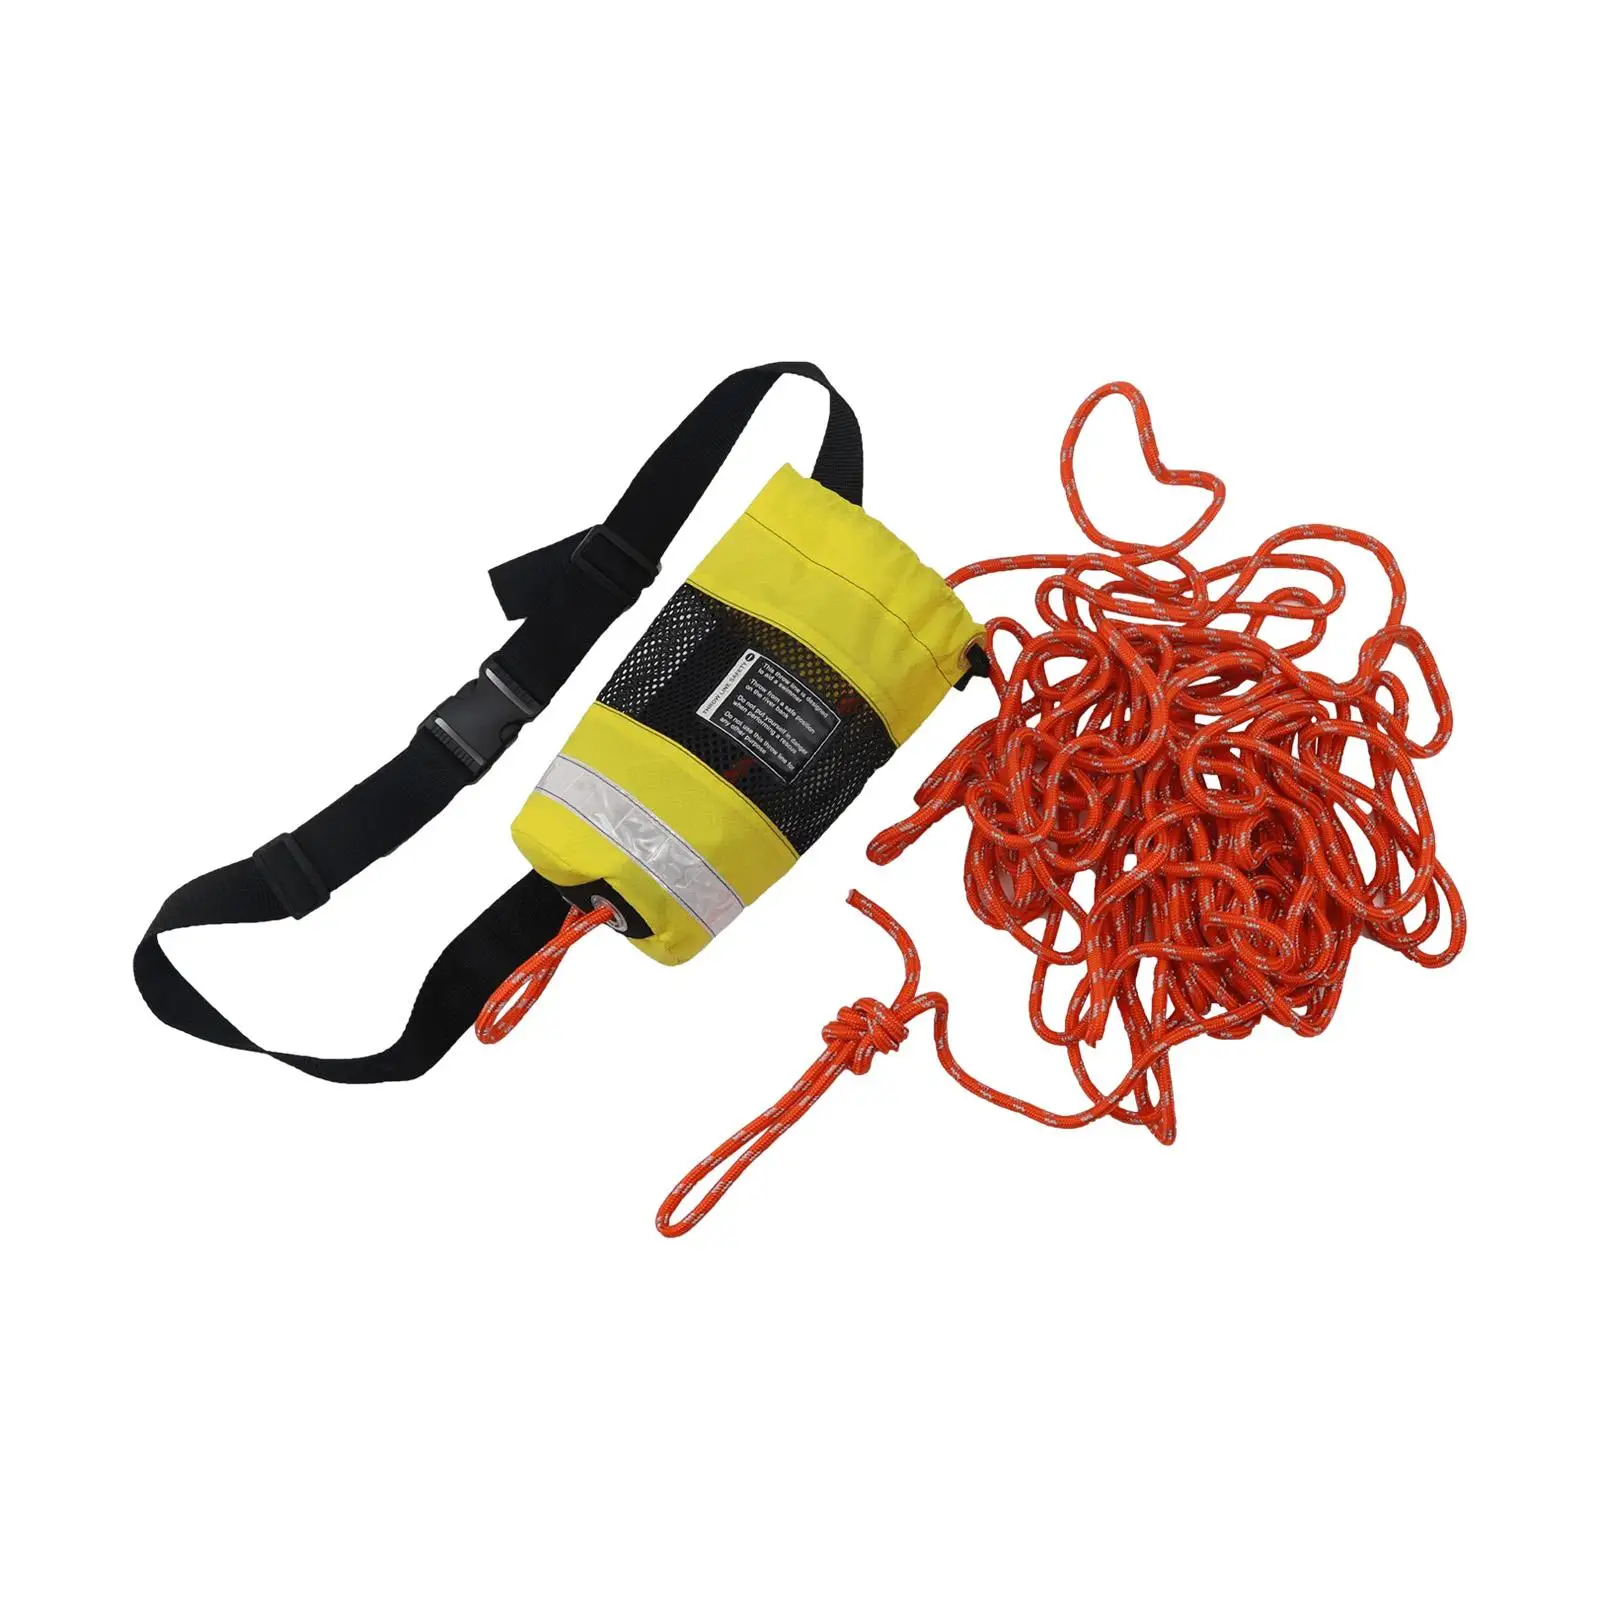 Portable Throwable Rope Throw Bag 21M Flotation Device Reflective for Yacht